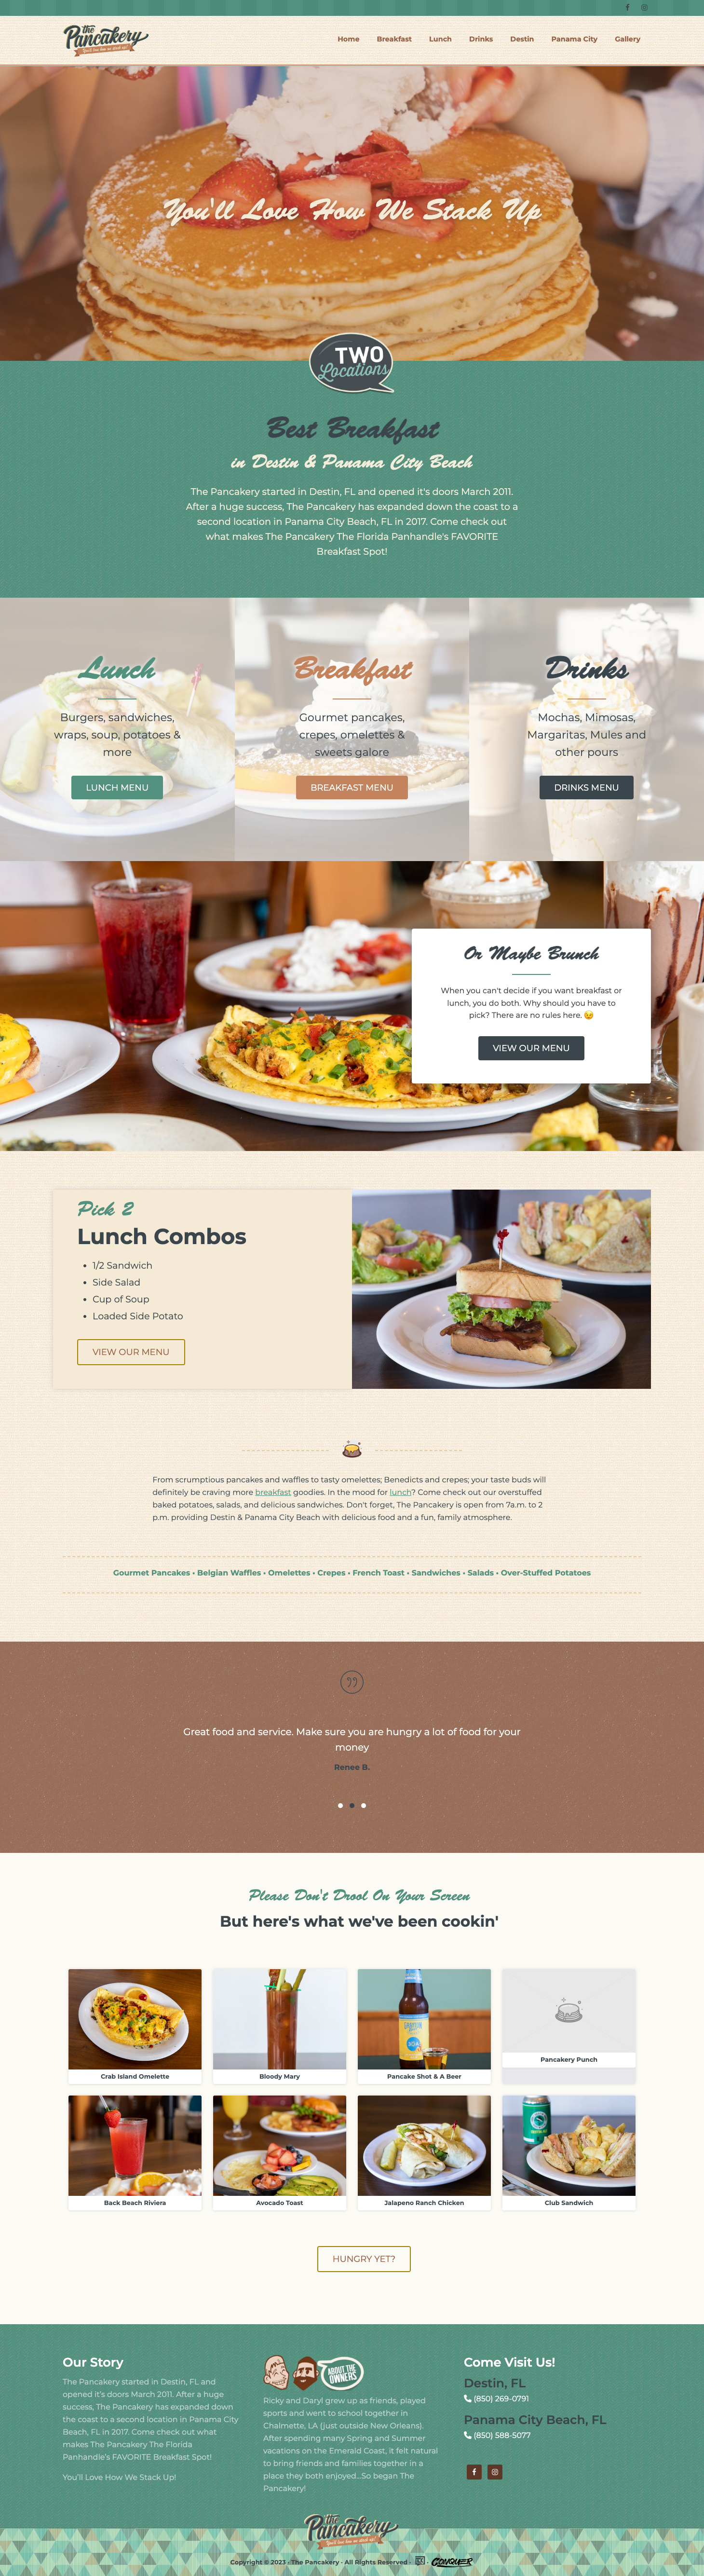 pancakery website home page